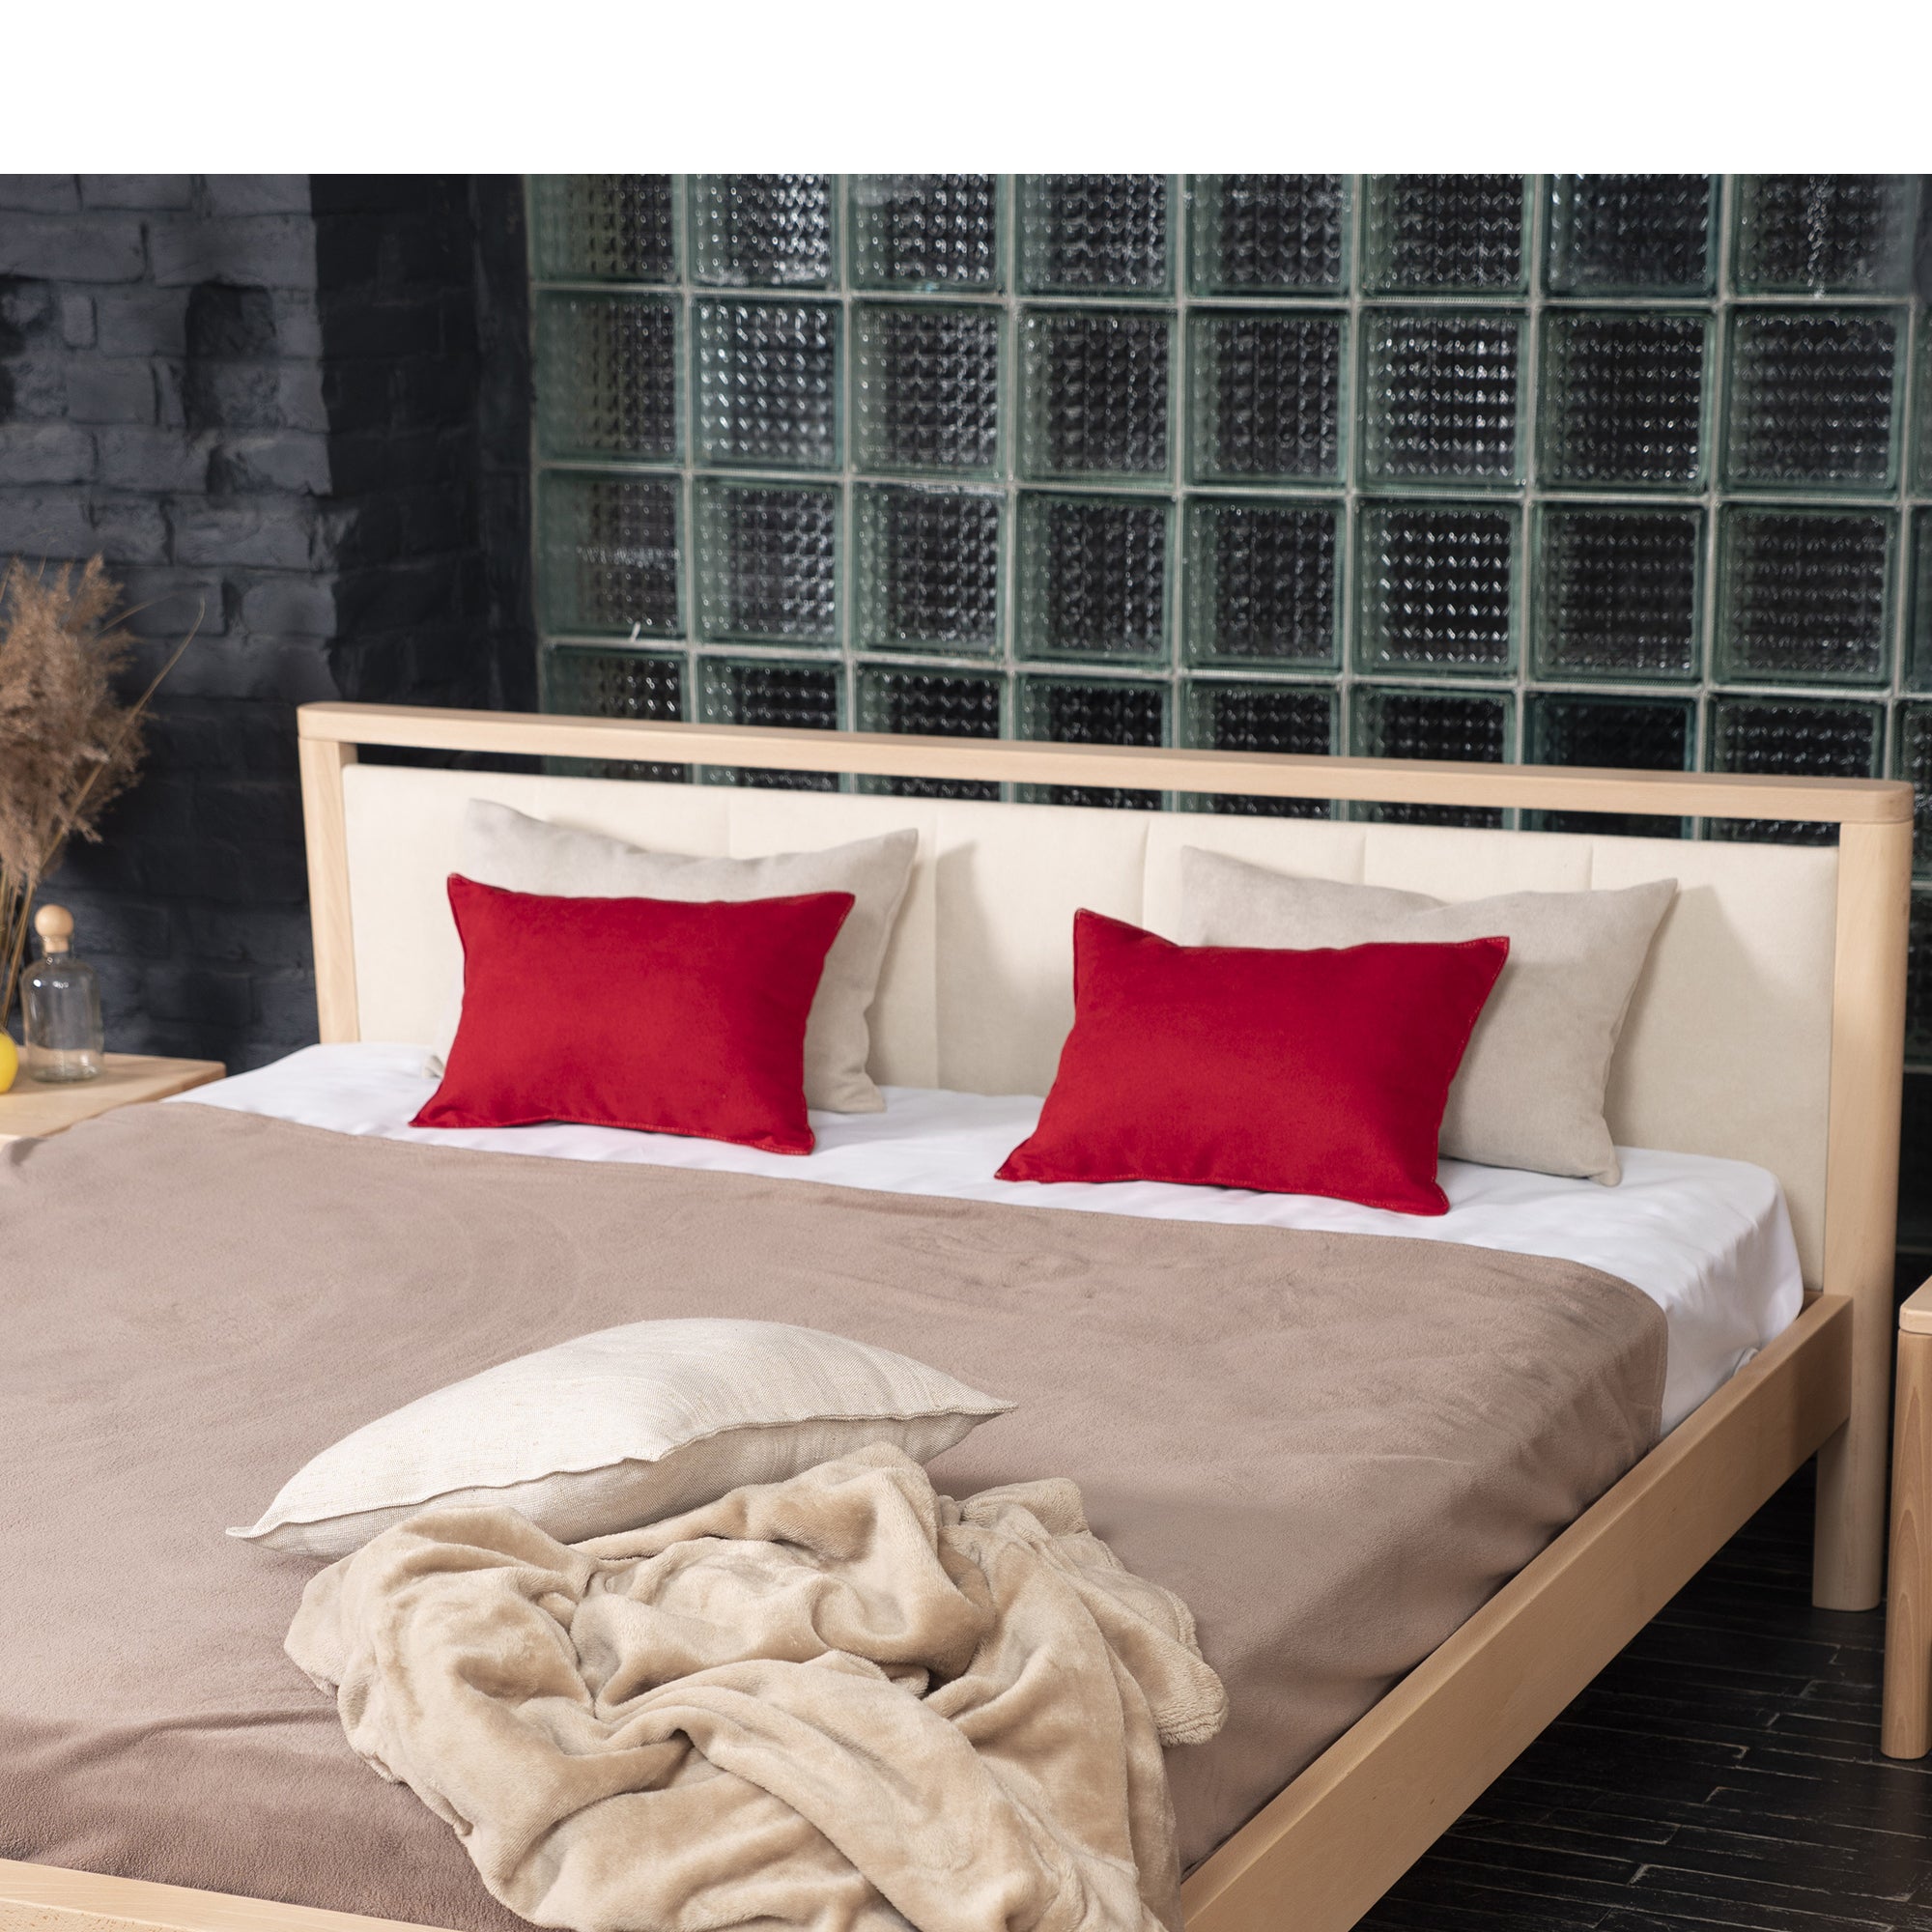 DROP SOFT Double Bed Natural Wood Beech Frame with Upholstered Headboard